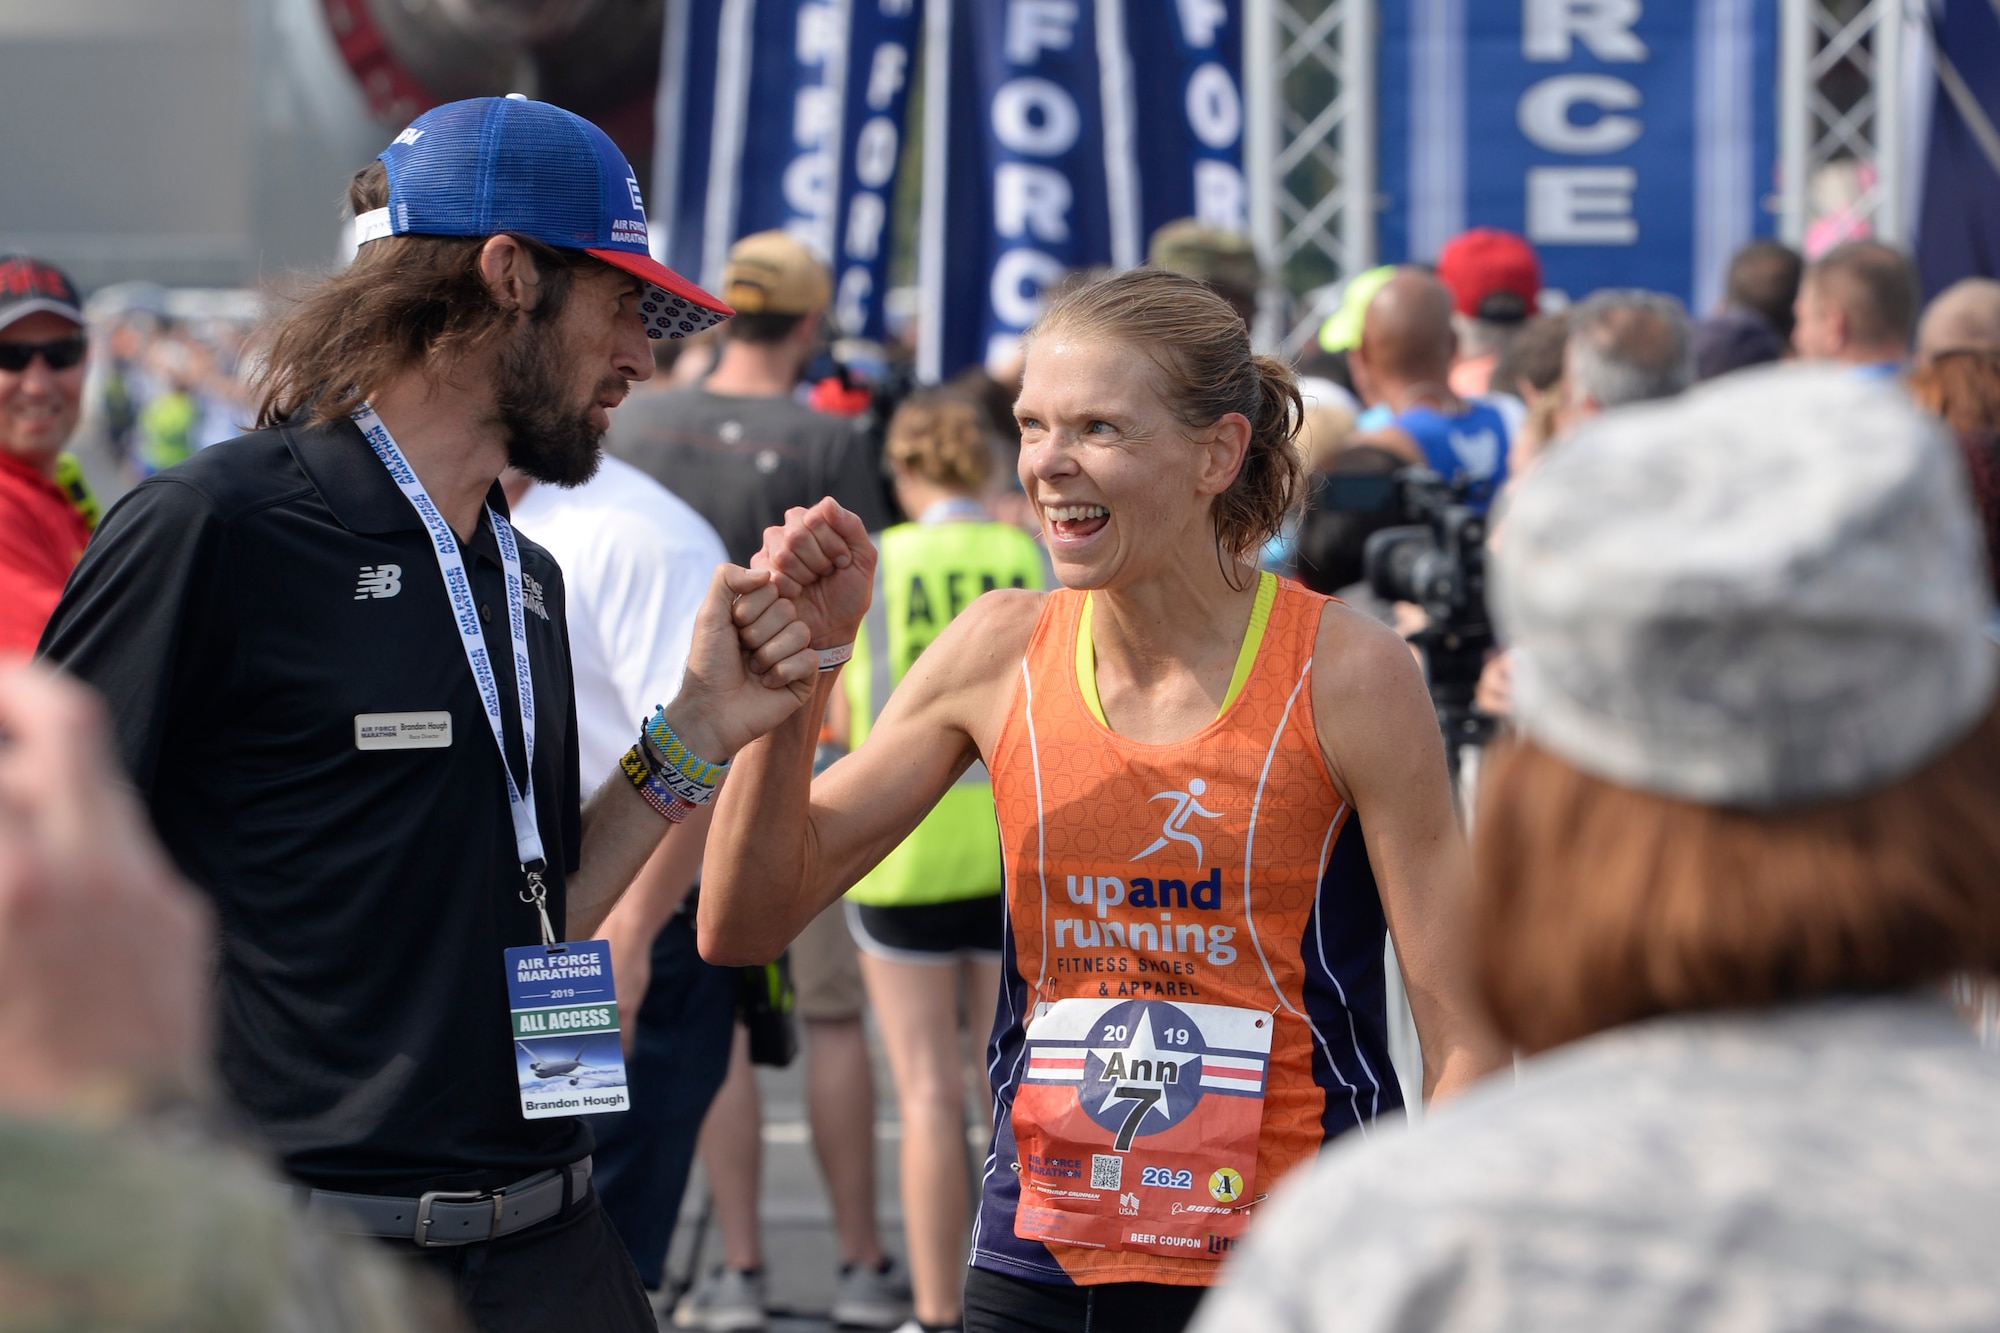 Brandon Hough, Air Force Marathon director, congratulates the full marathon female winner Ann Alyanak from Bellbrook, Ohio, at the Air Force Marathon at Wright-Patterson Air Force Base, Ohio, on Sept. 21. (U.S. Air Force photo/Ty Greenlees)